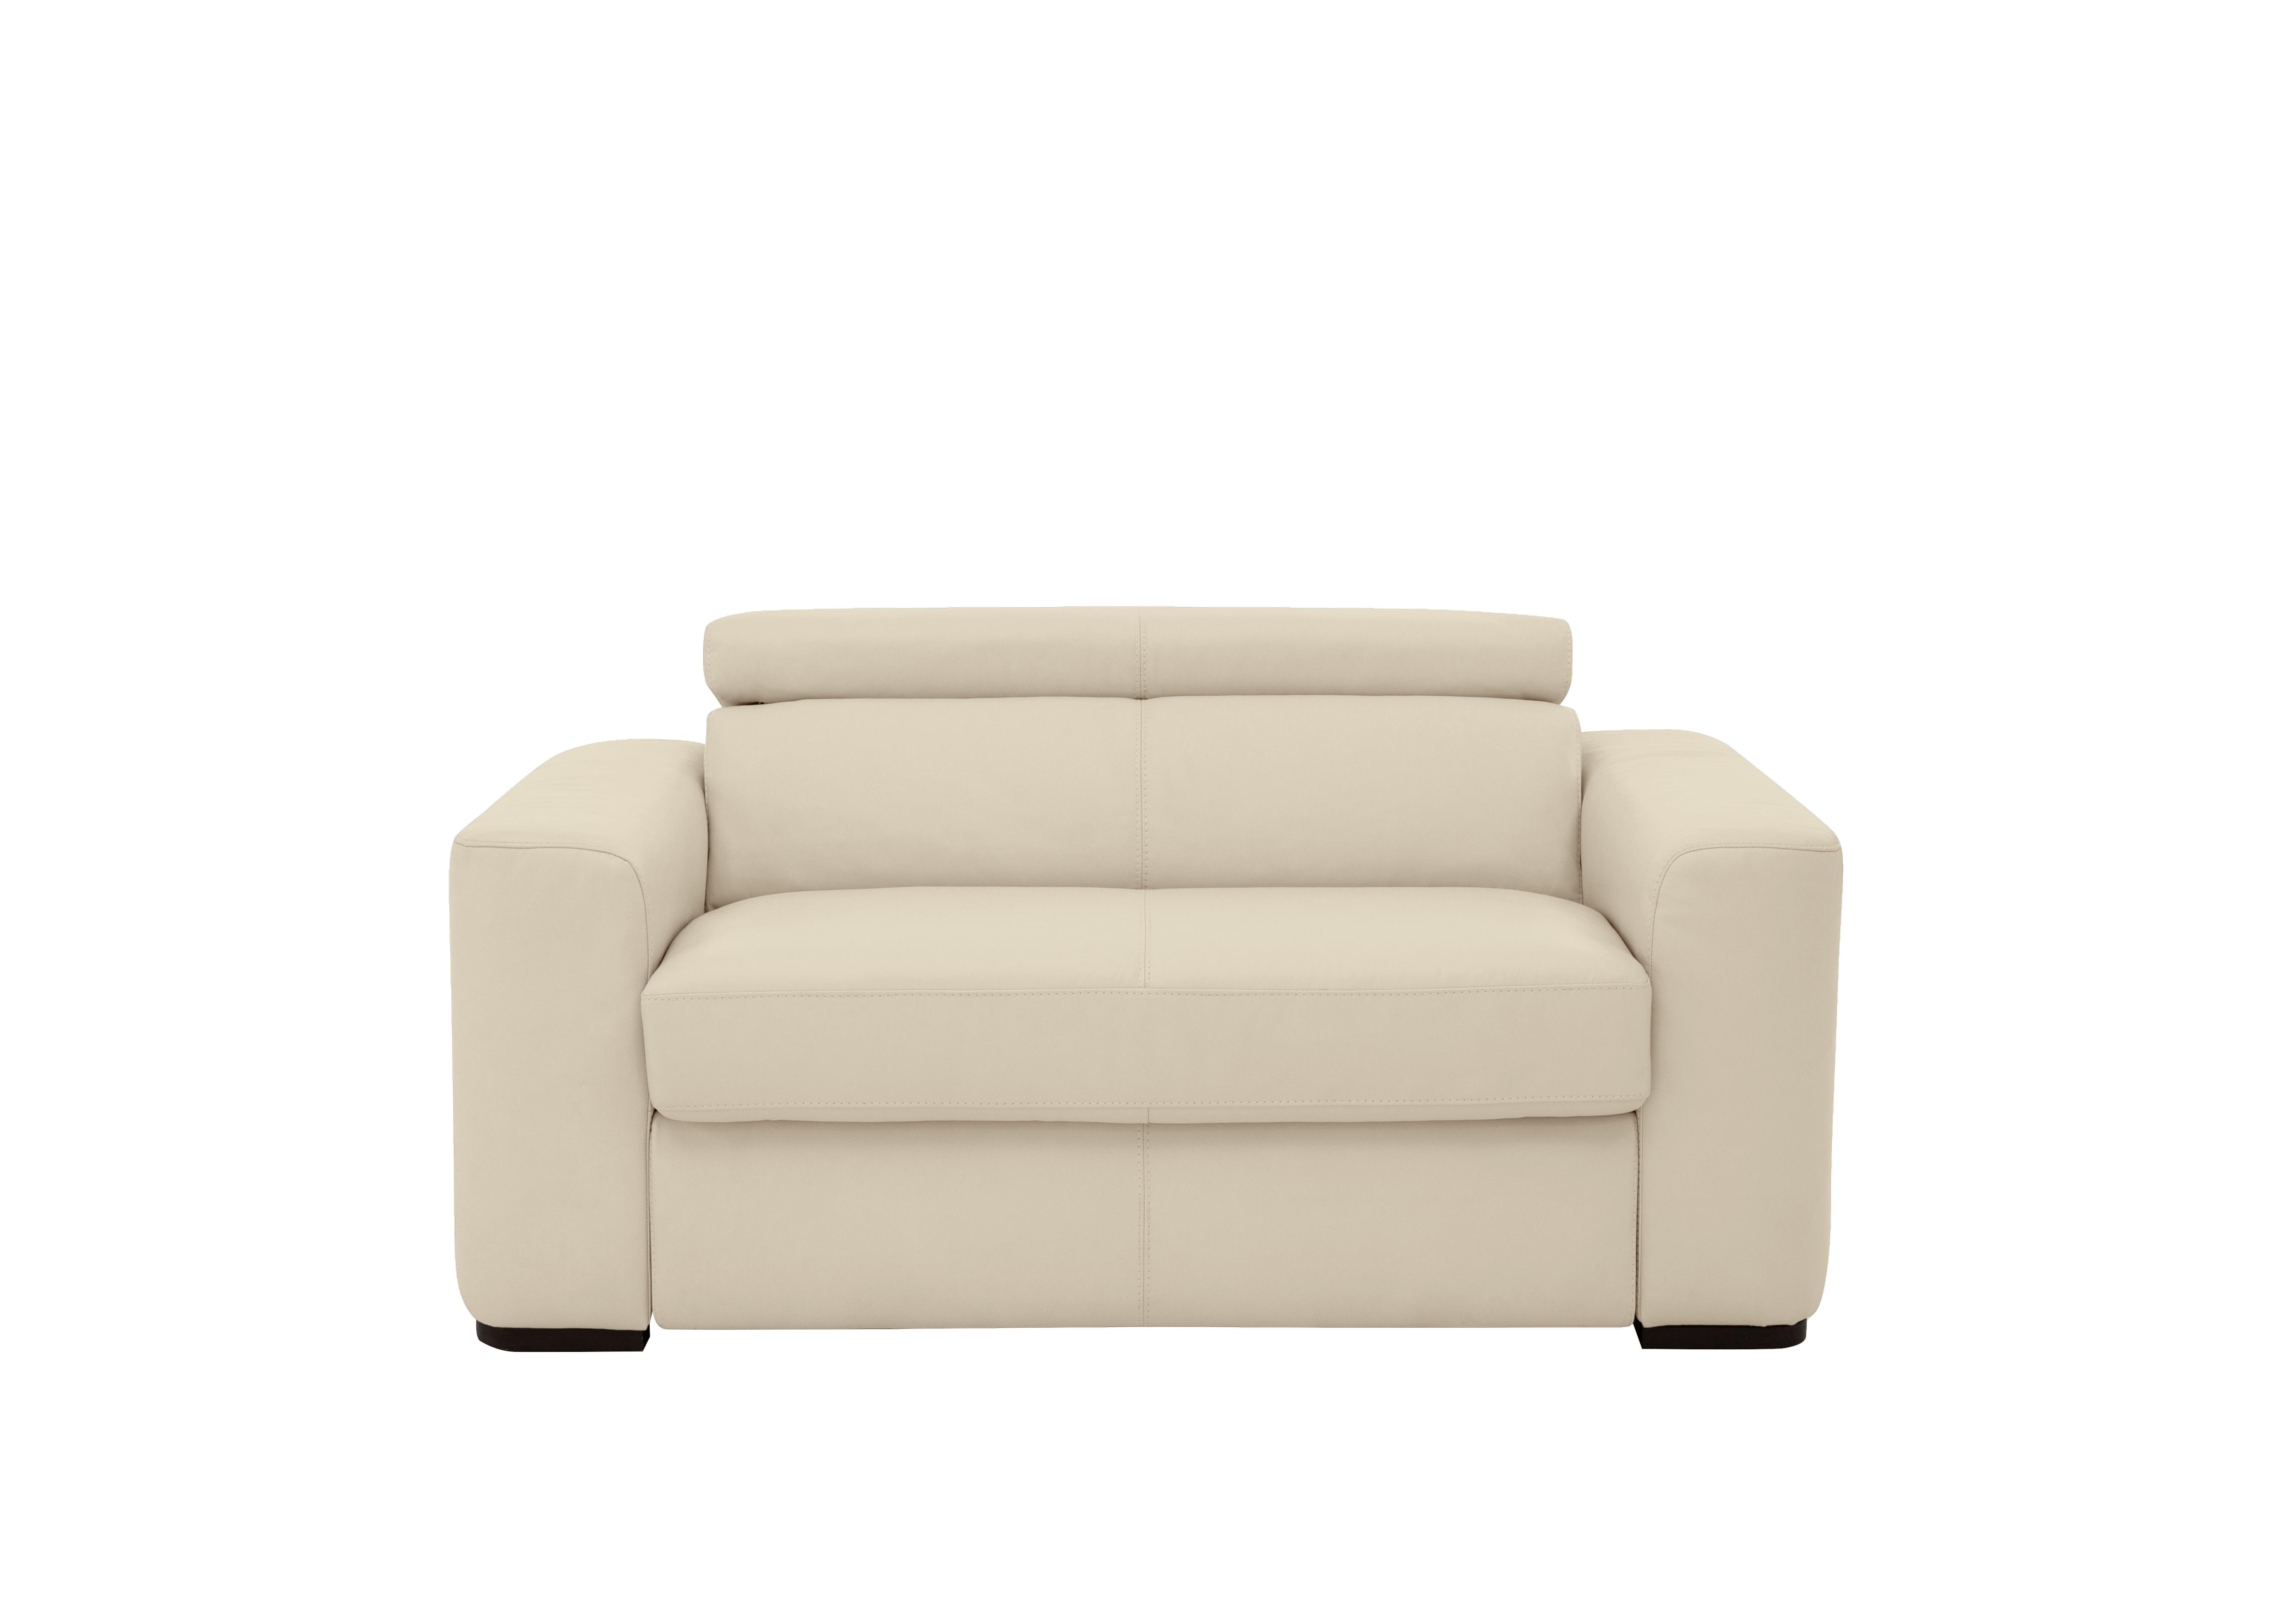 Infinity Leather Chair Sofabed in Bv-862c Bisque on Furniture Village